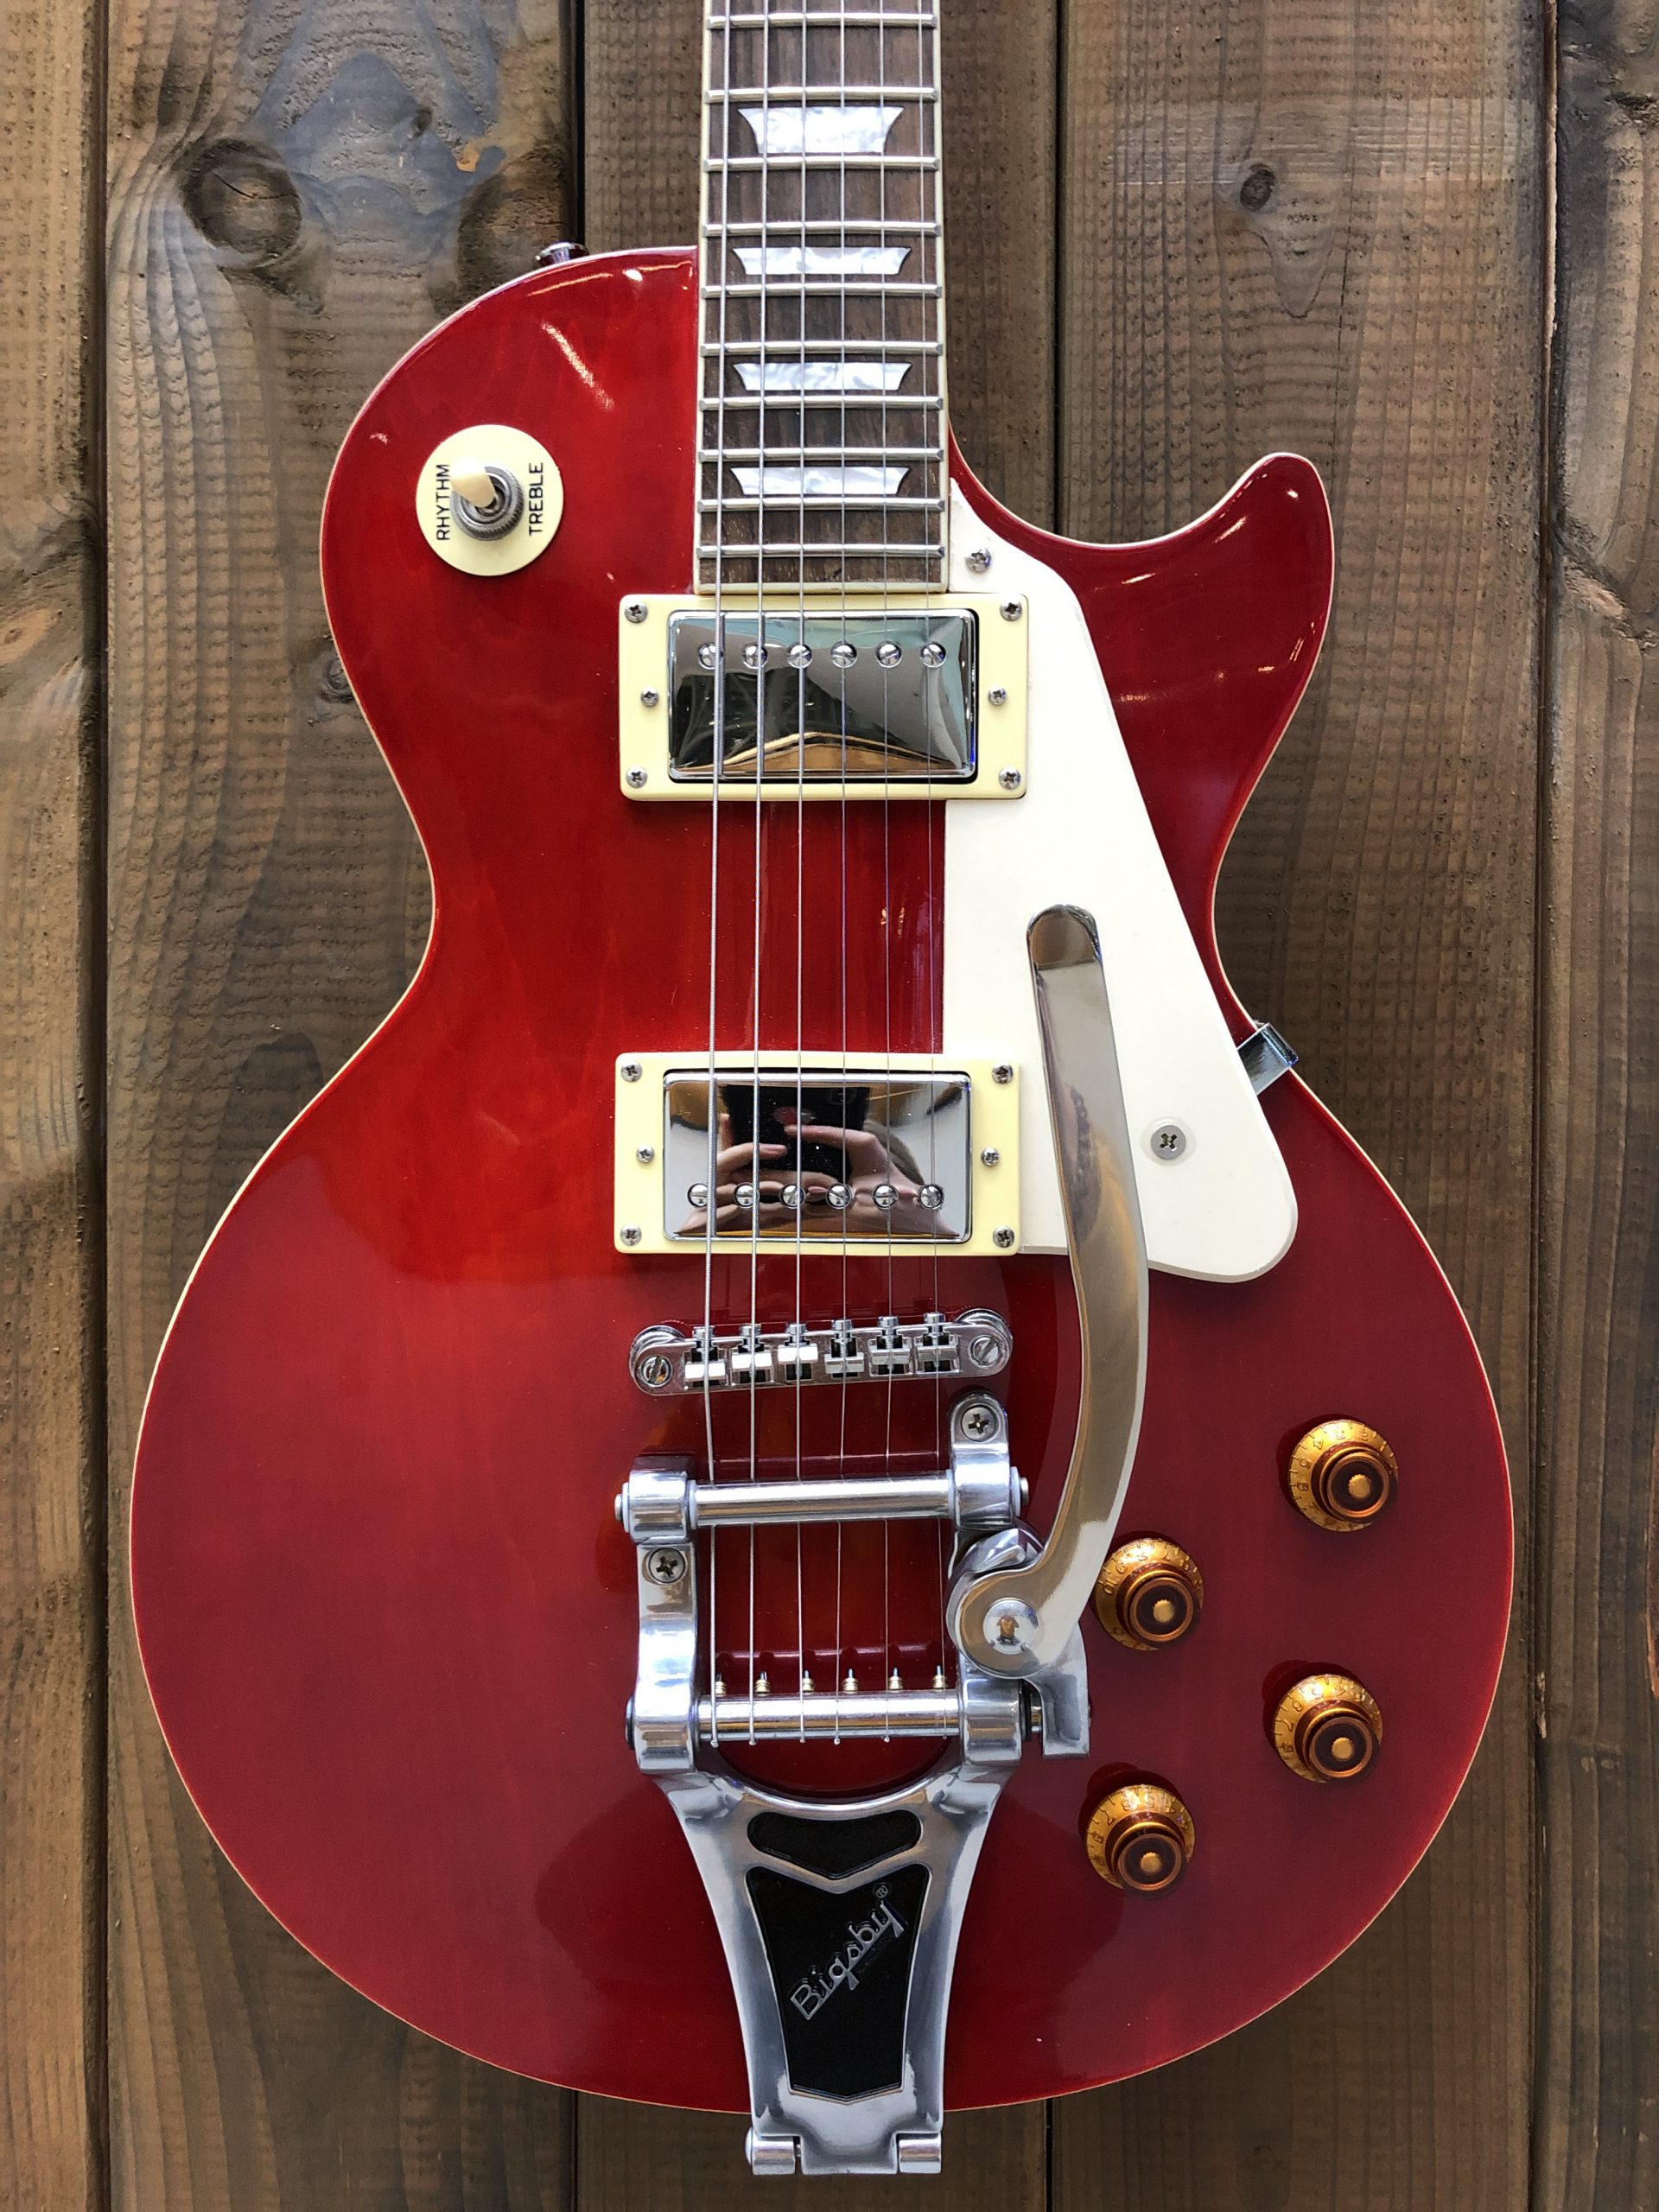 Afkorting Anzai nicotine Epiphone Les Paul Bigsby Limited Edition – Rentocaster